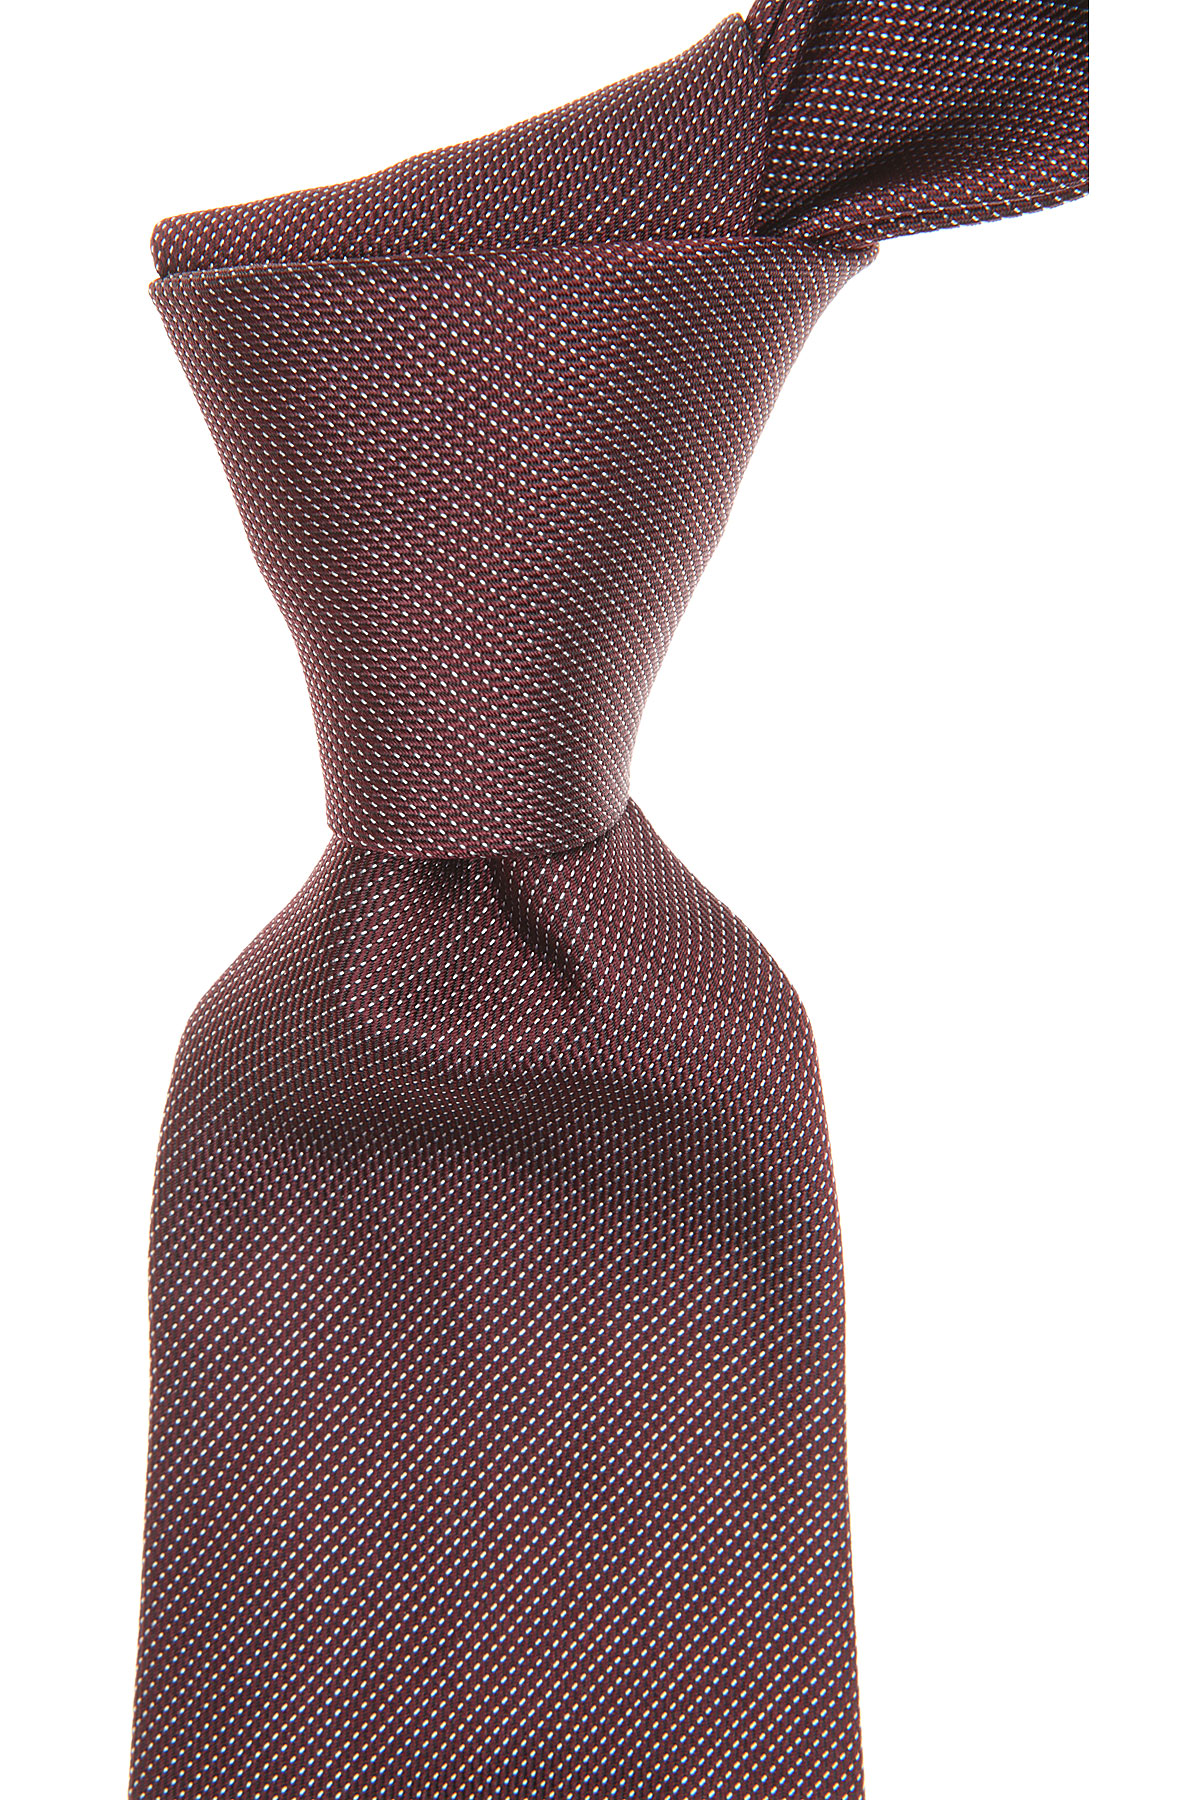 Ties Christian Dior, Style code: 216042--